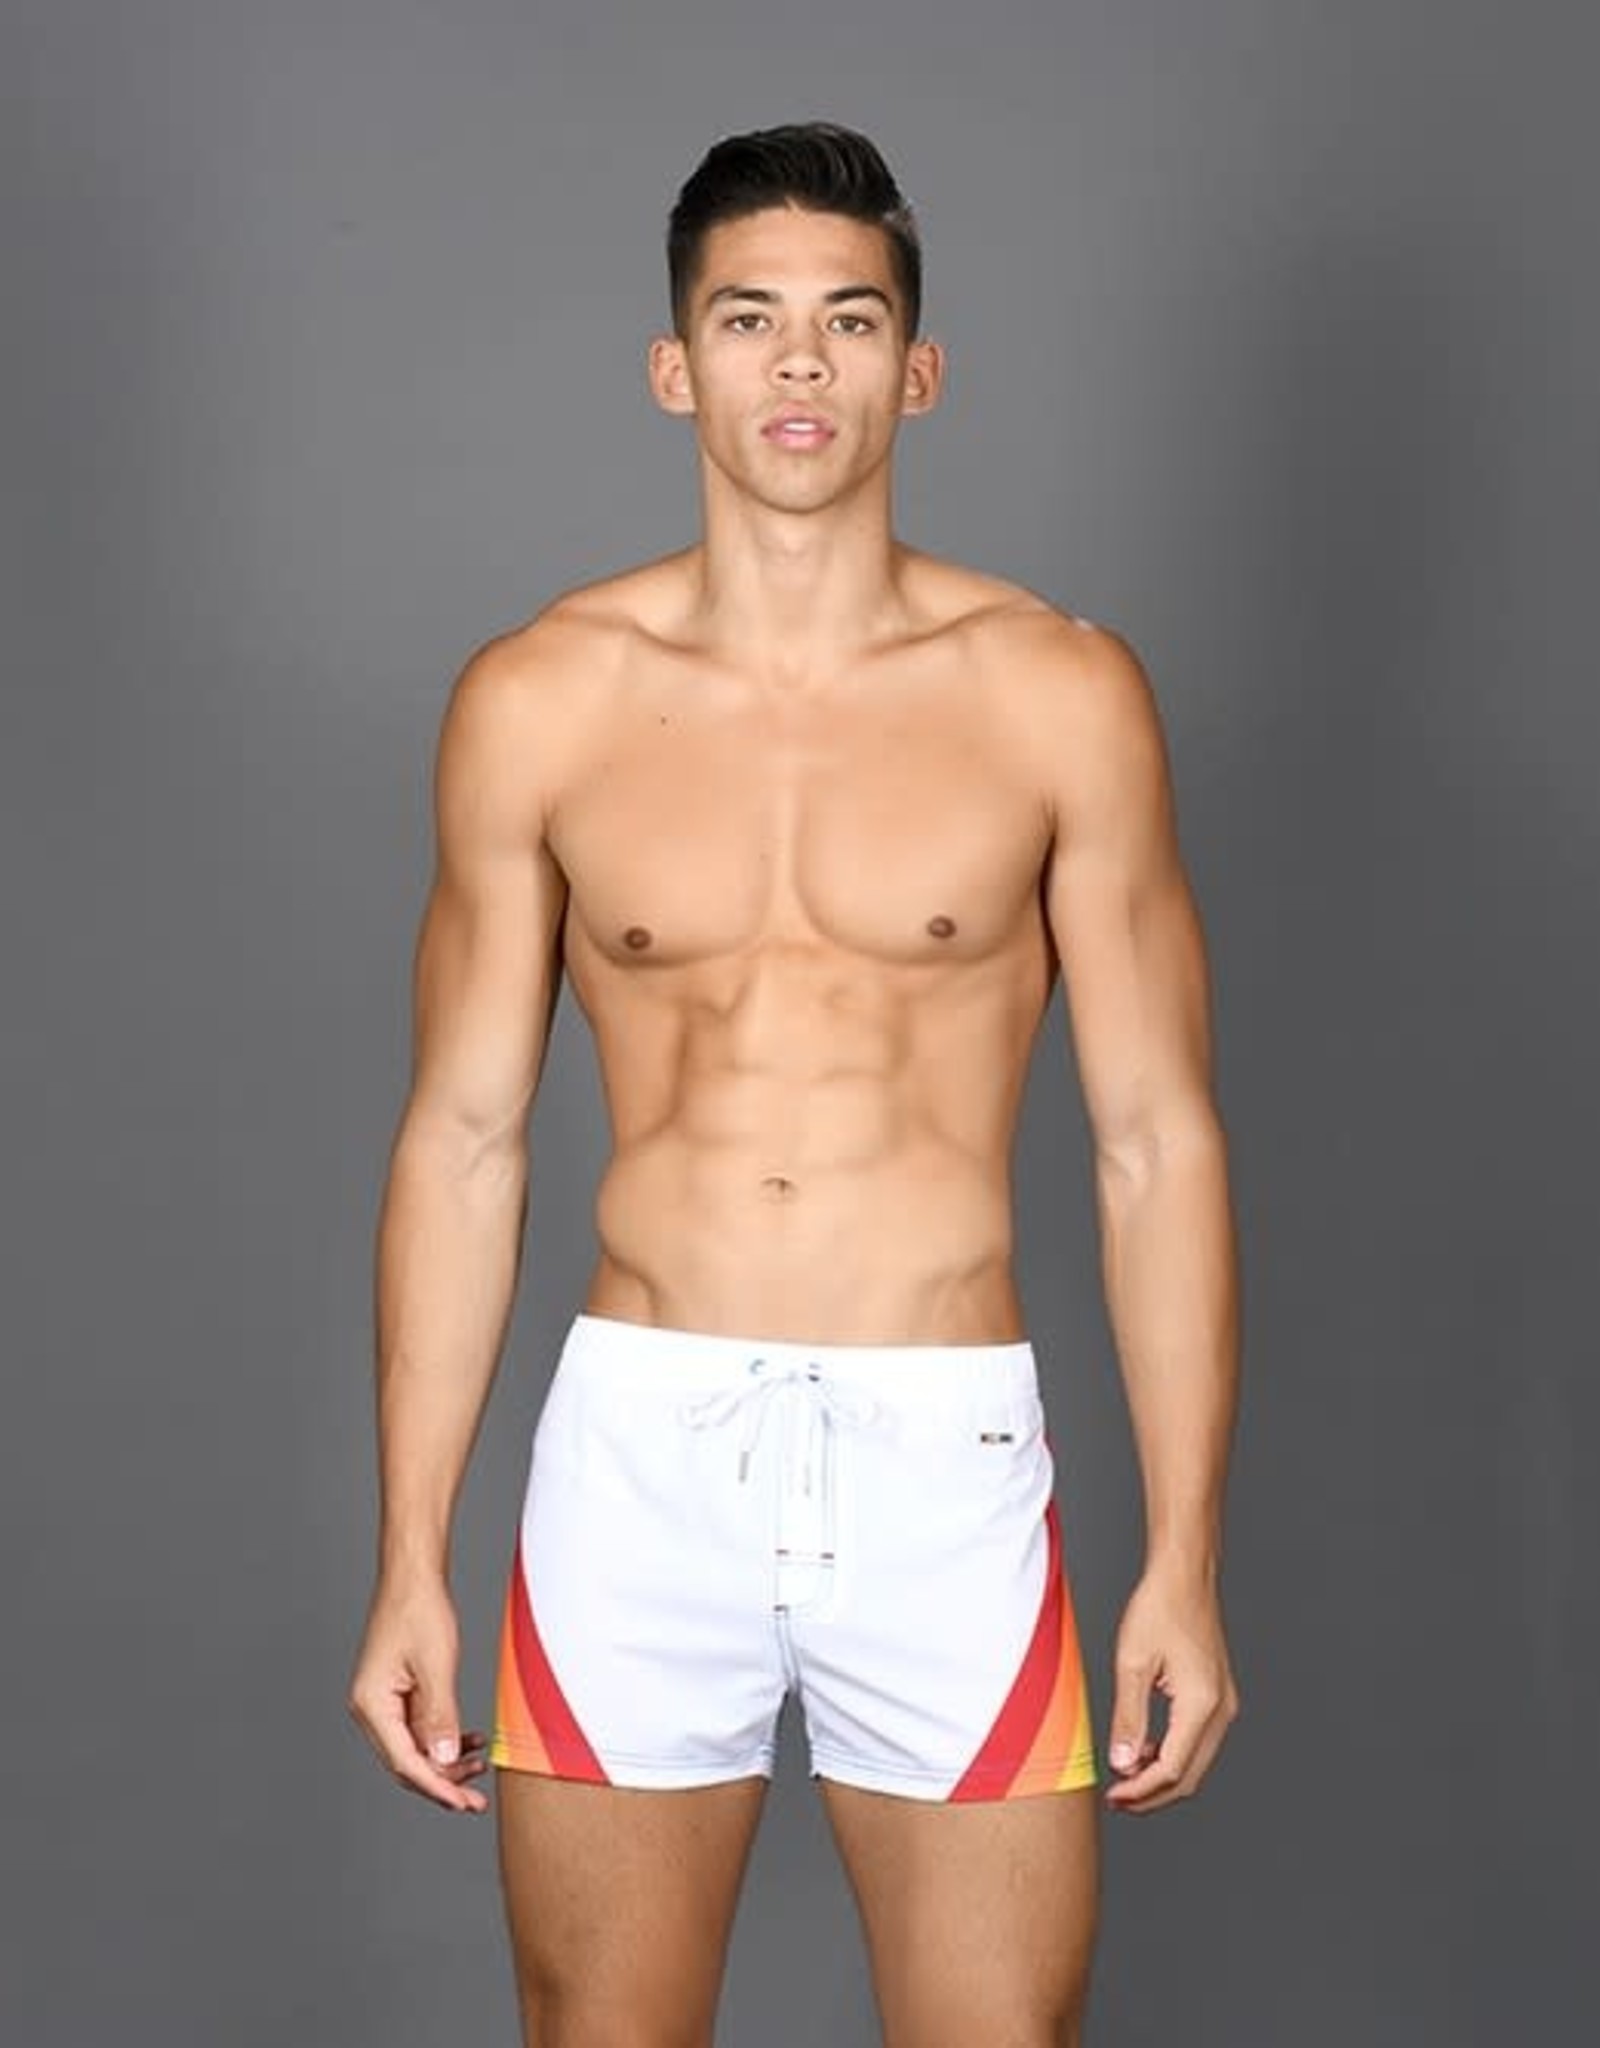 Andrew Christian Rocket Pride Swim Shorts (in store purchase only)